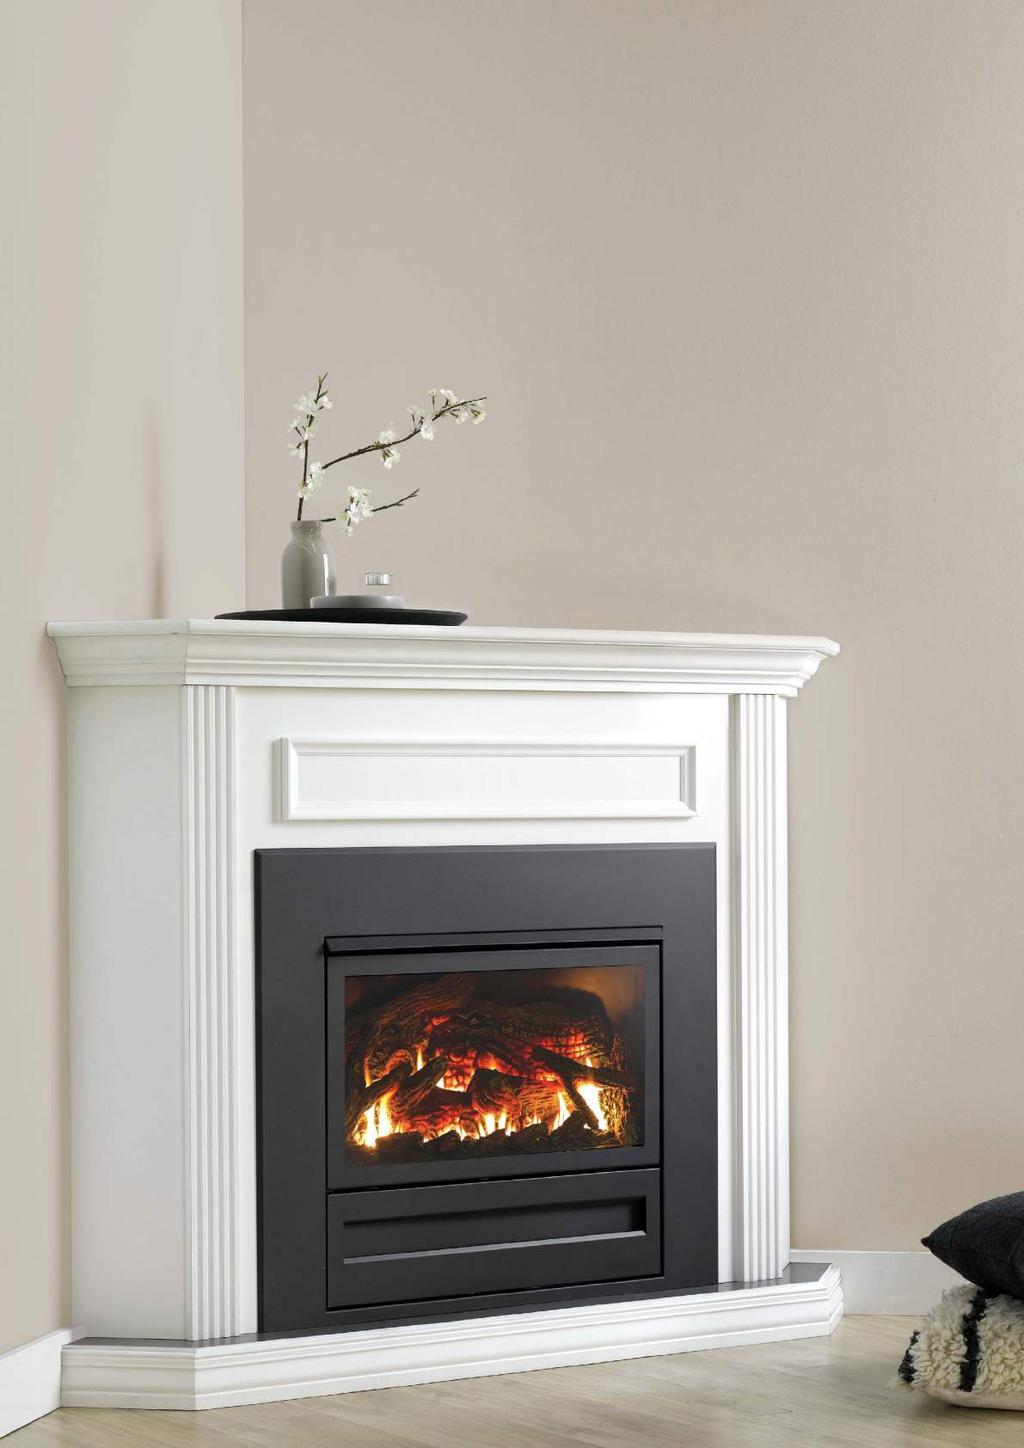 Beautiful Mantel Options Select traditional or contemporary designs to suit your style Aurora Climate Systems has a range of Mantel options available which complement your